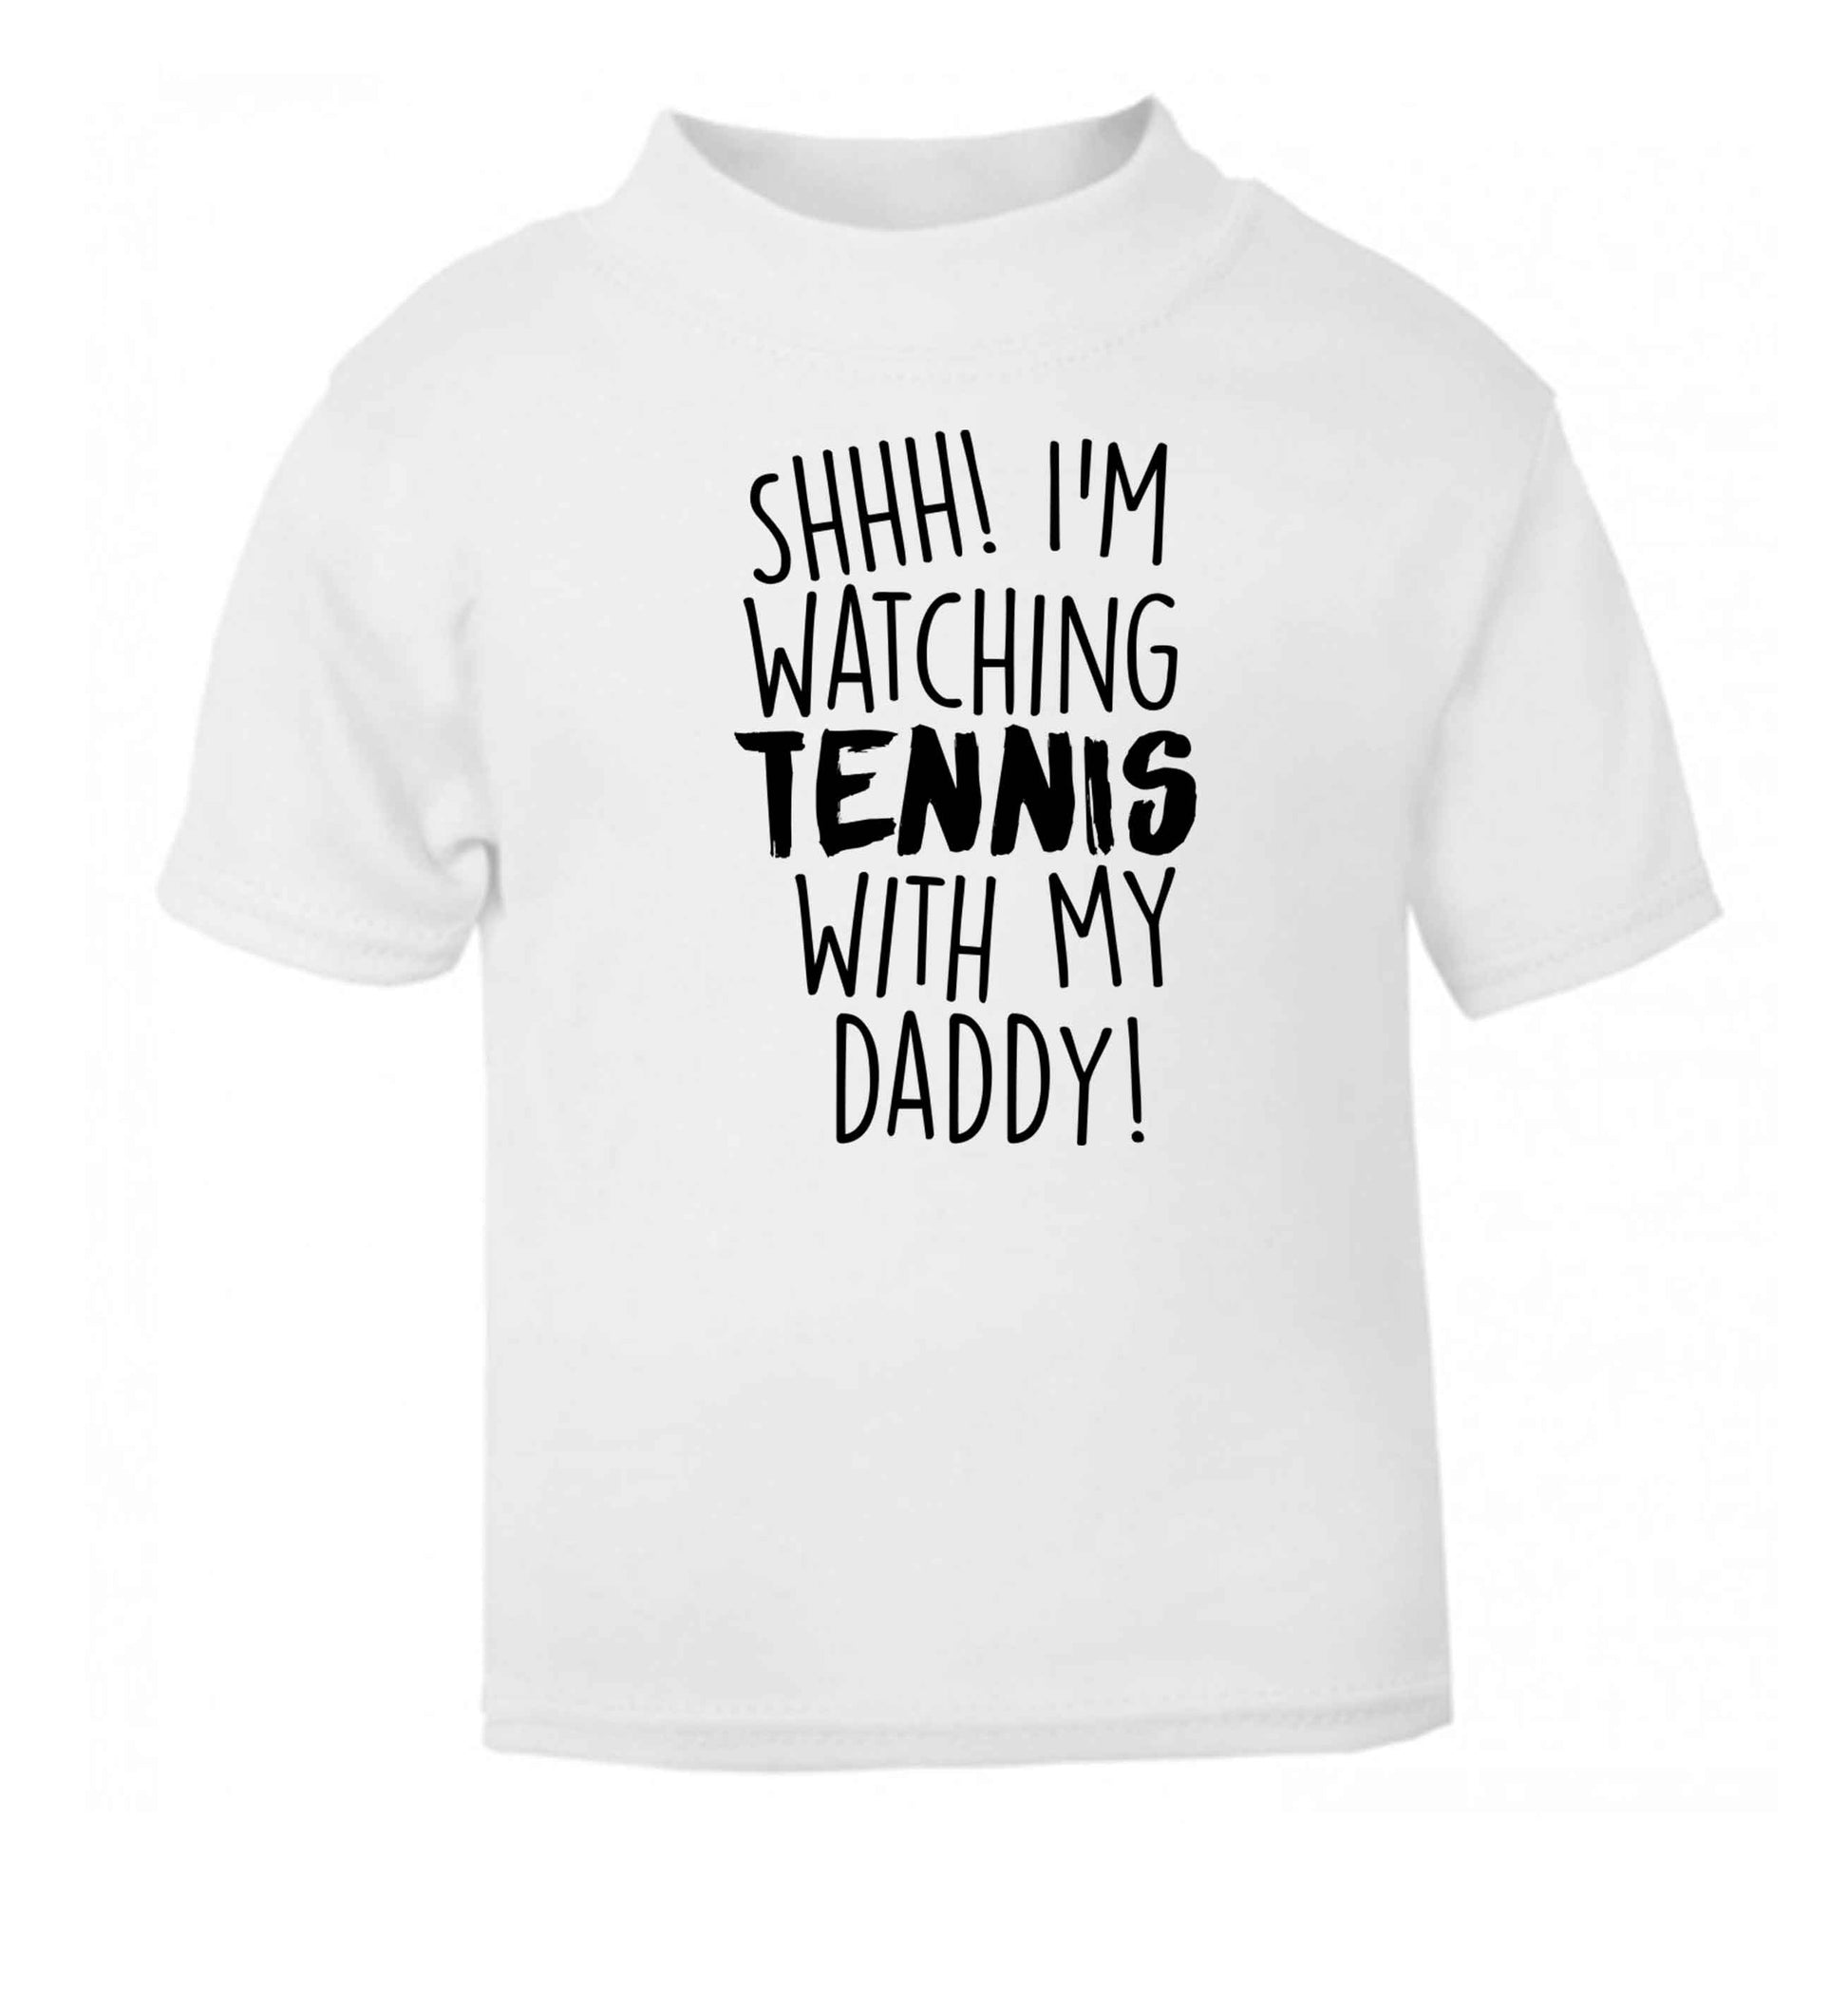 Shh! I'm watching tennis with my daddy! white Baby Toddler Tshirt 2 Years